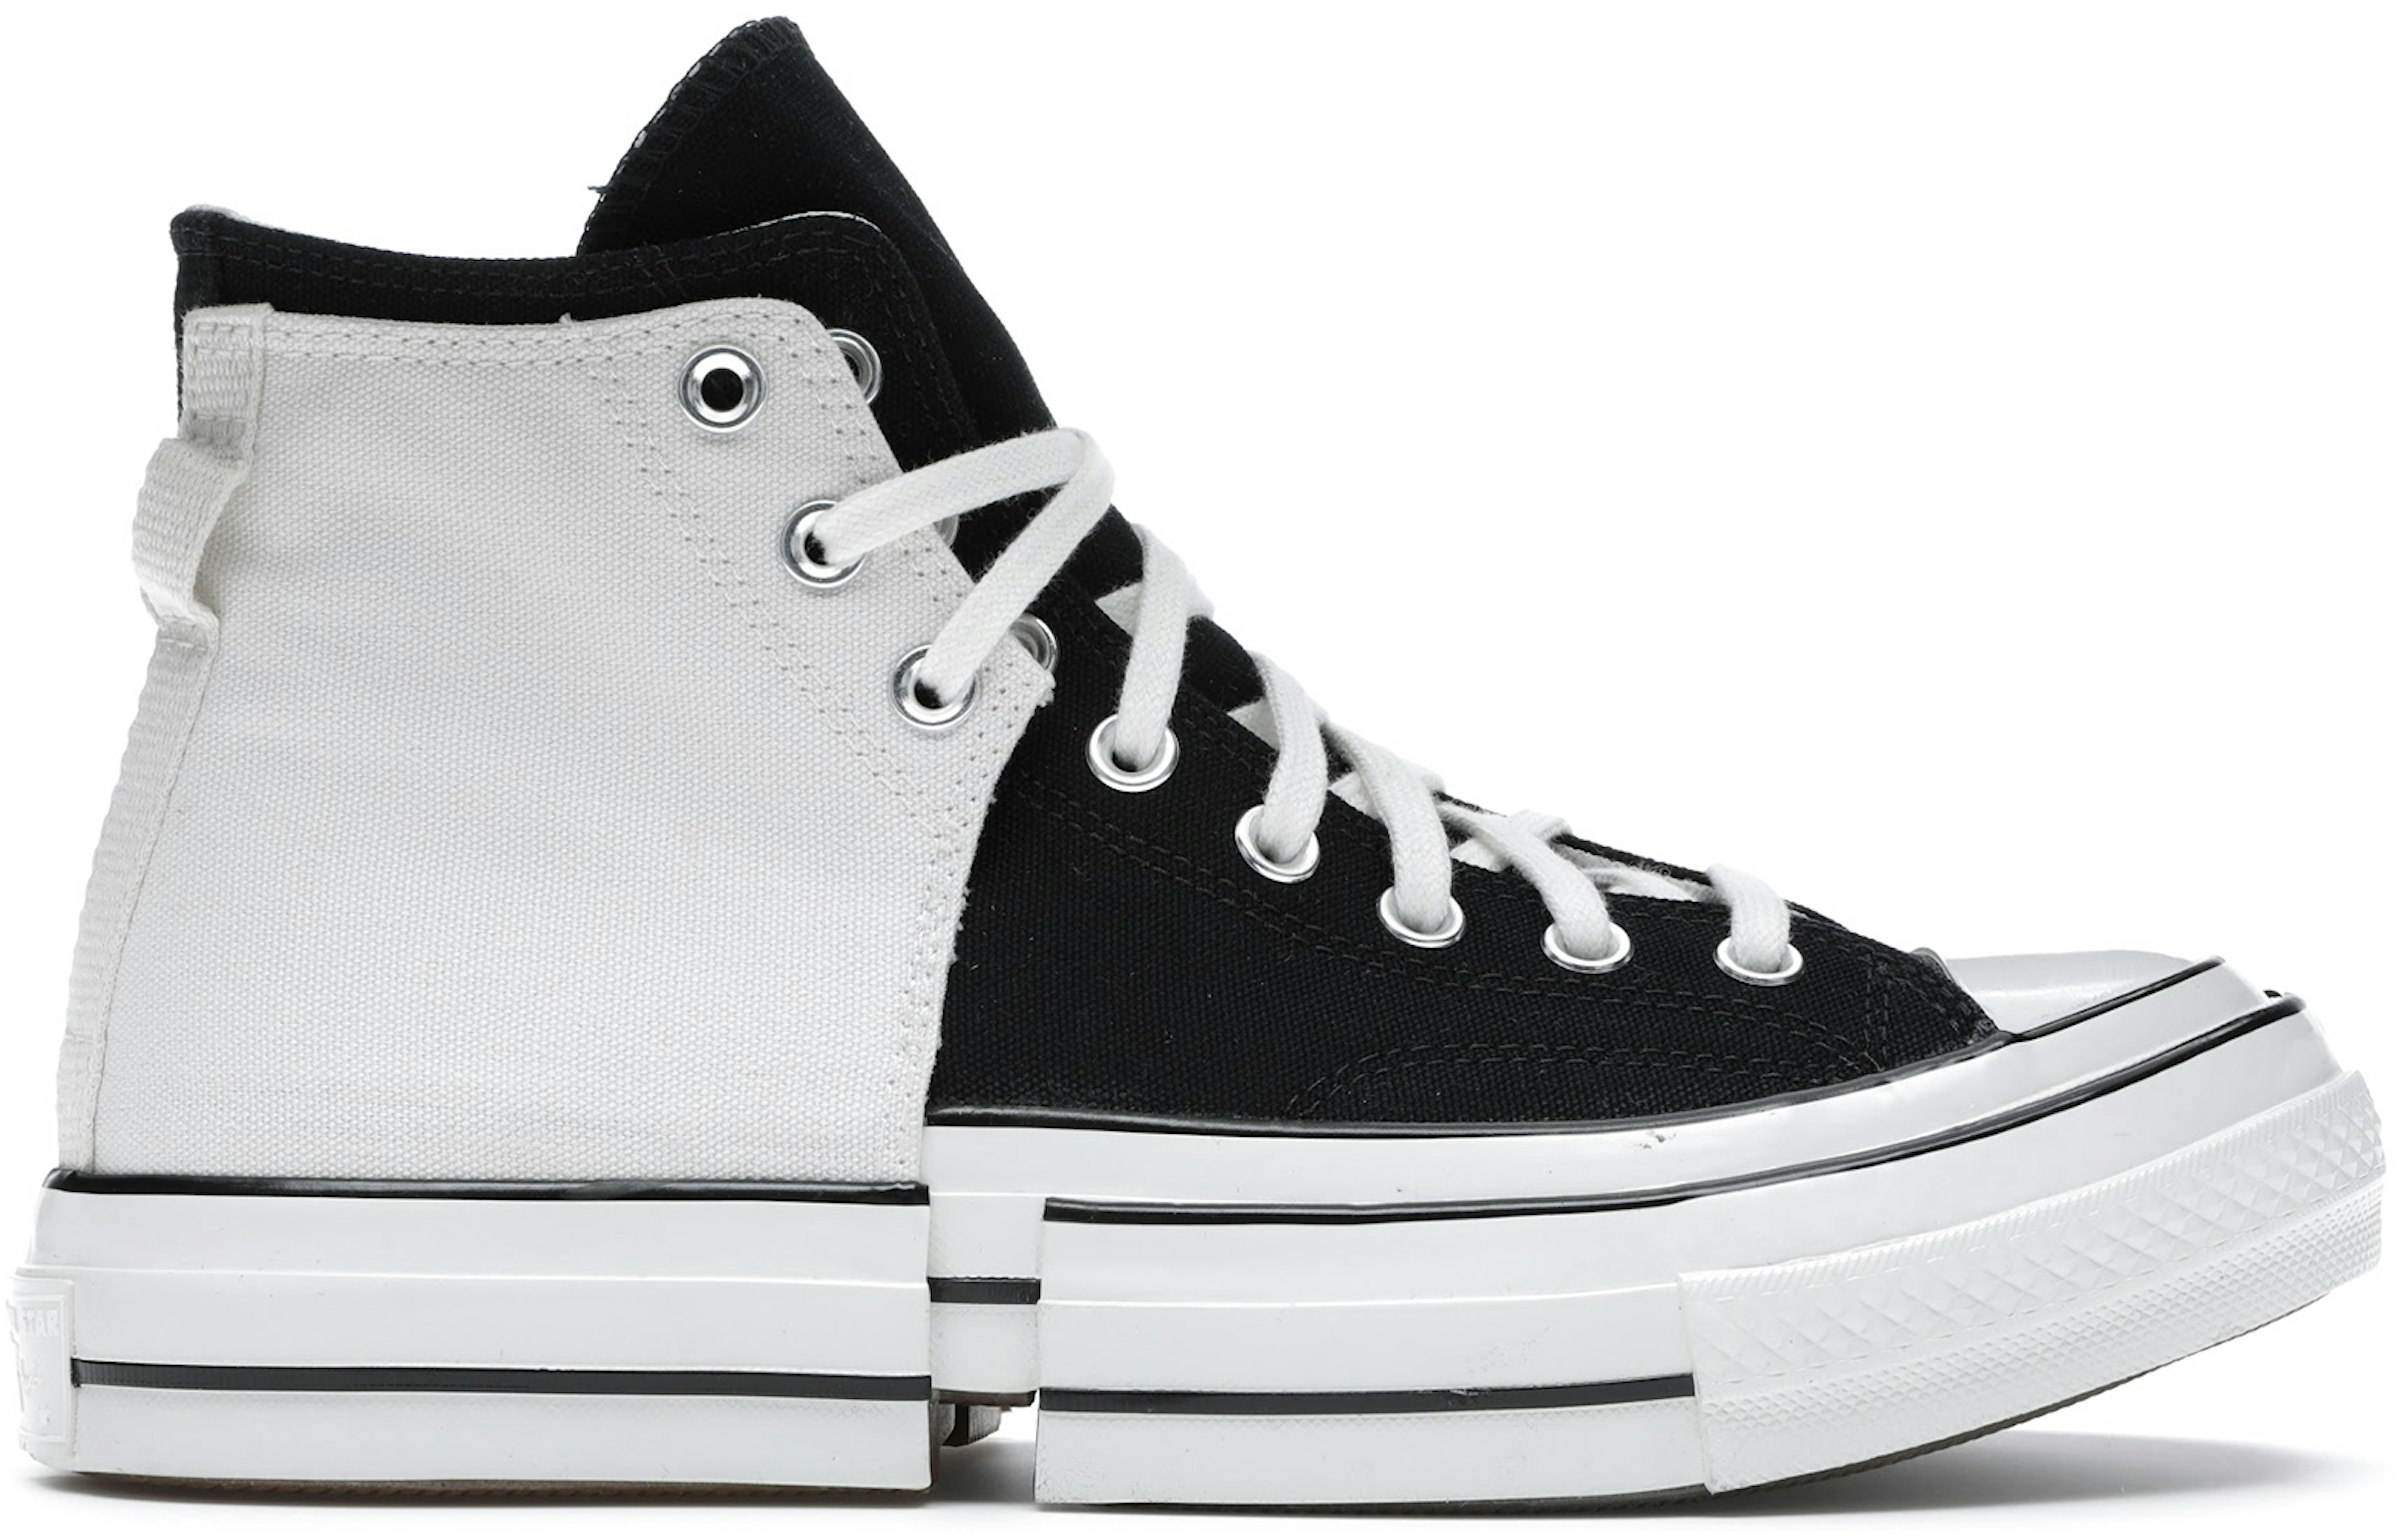 Converse Chuck Taylor All-Star 70 Hi Feng Chen 2-in-1 Ivory Black Men's - 169839C - US